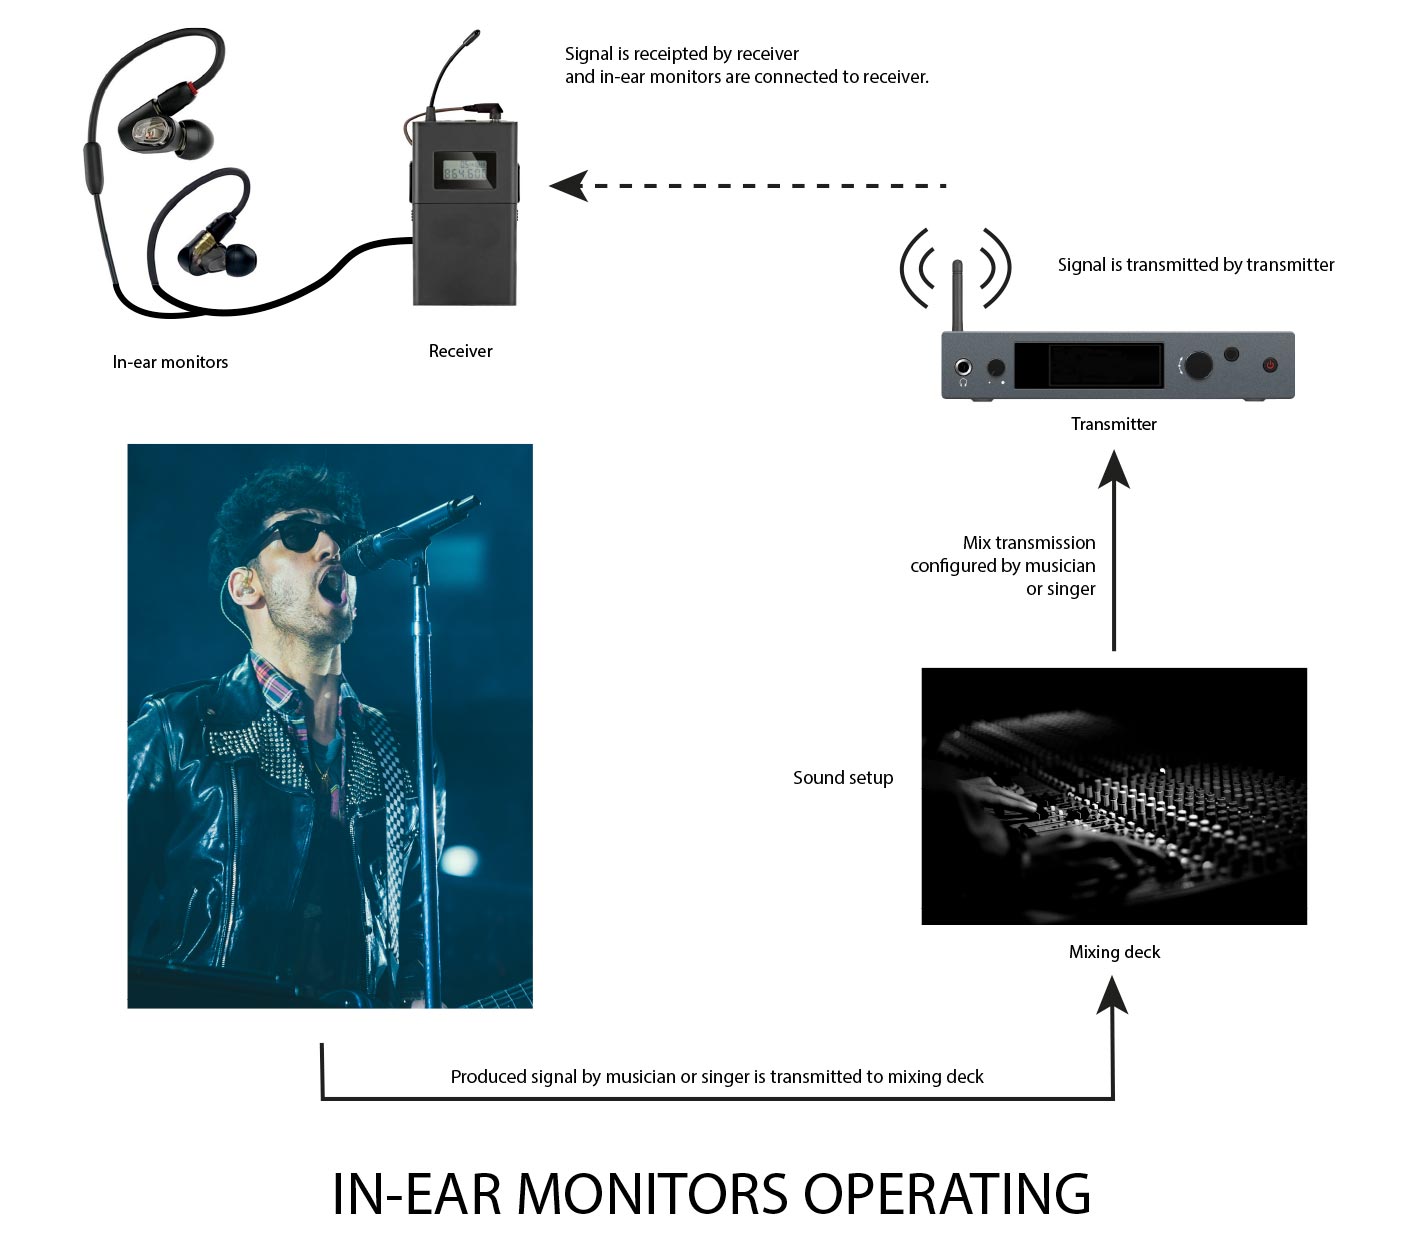 What are the benefits of in-ear monitors for musicians?